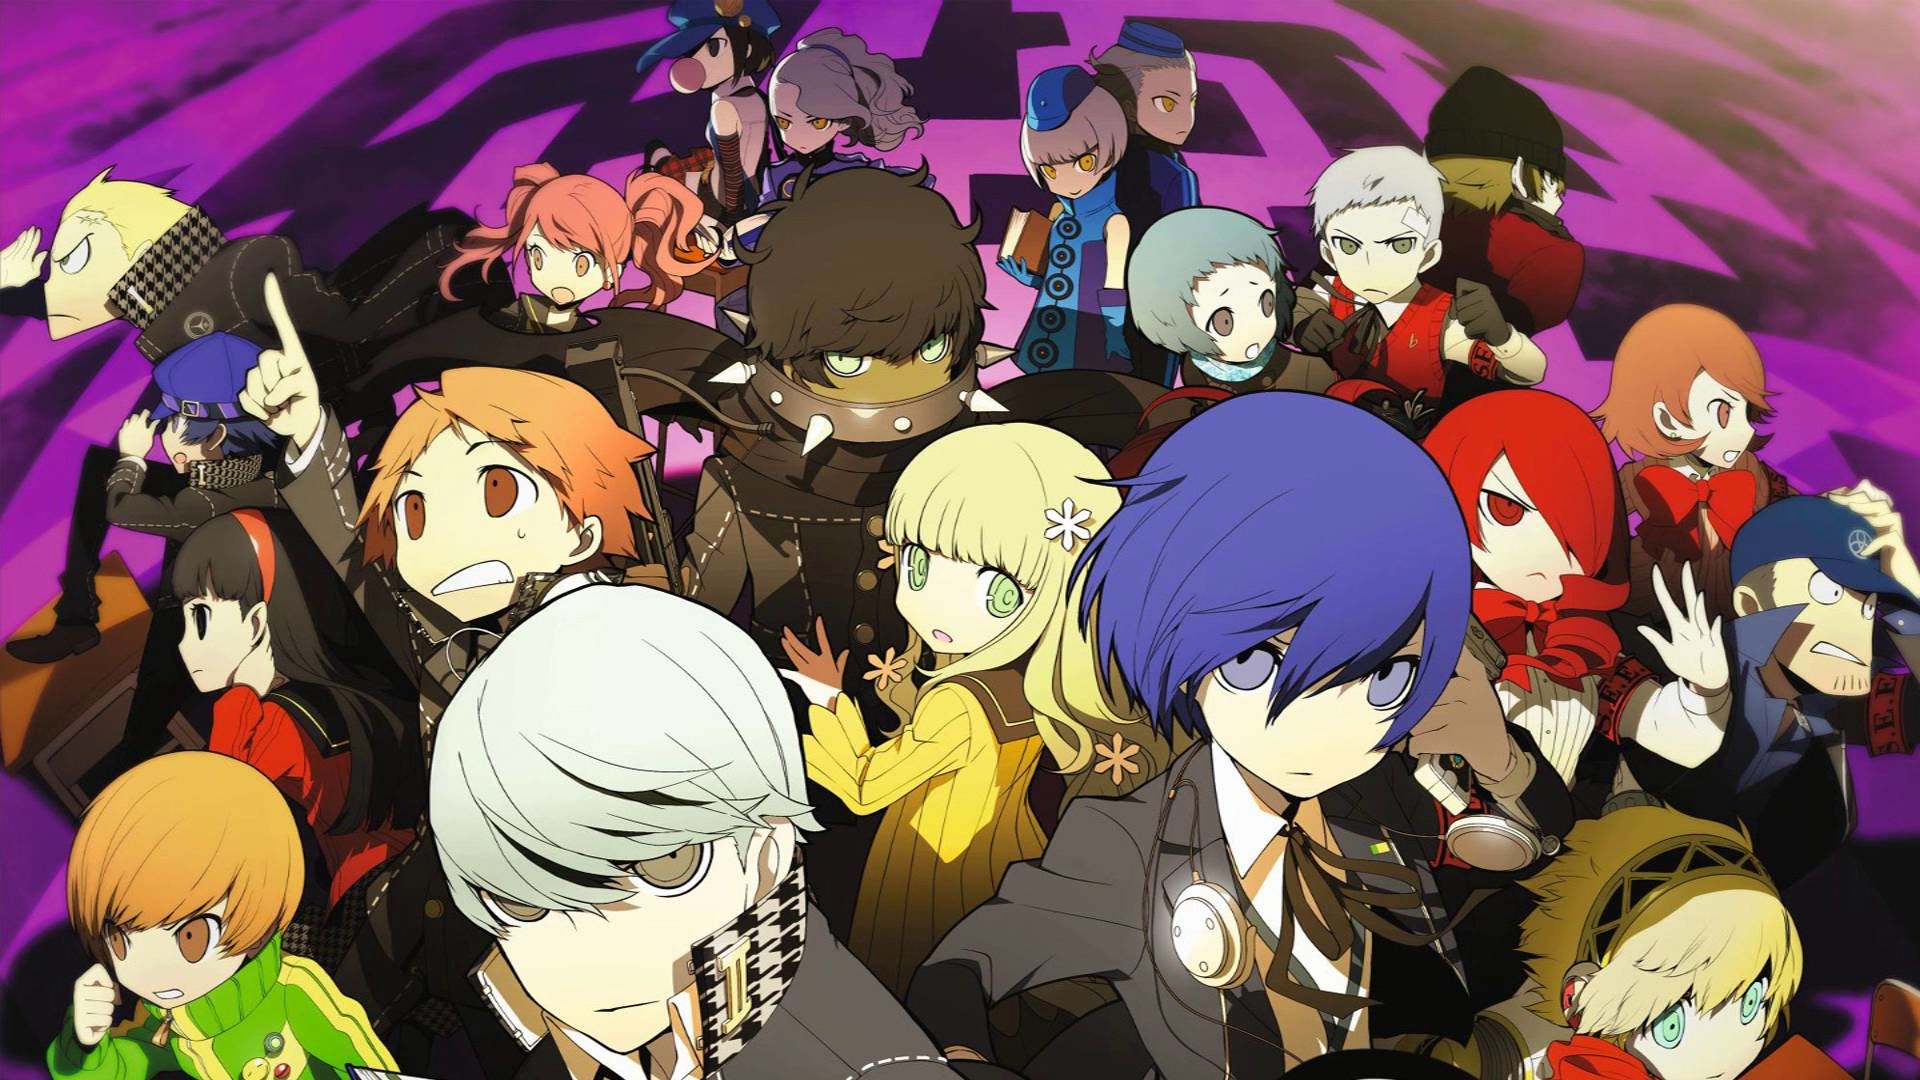 1920x1080 Klagmar's Top VGM #2,030 - Persona Q: Shadow of the Labyrinth - Laser Beam  - YouTube